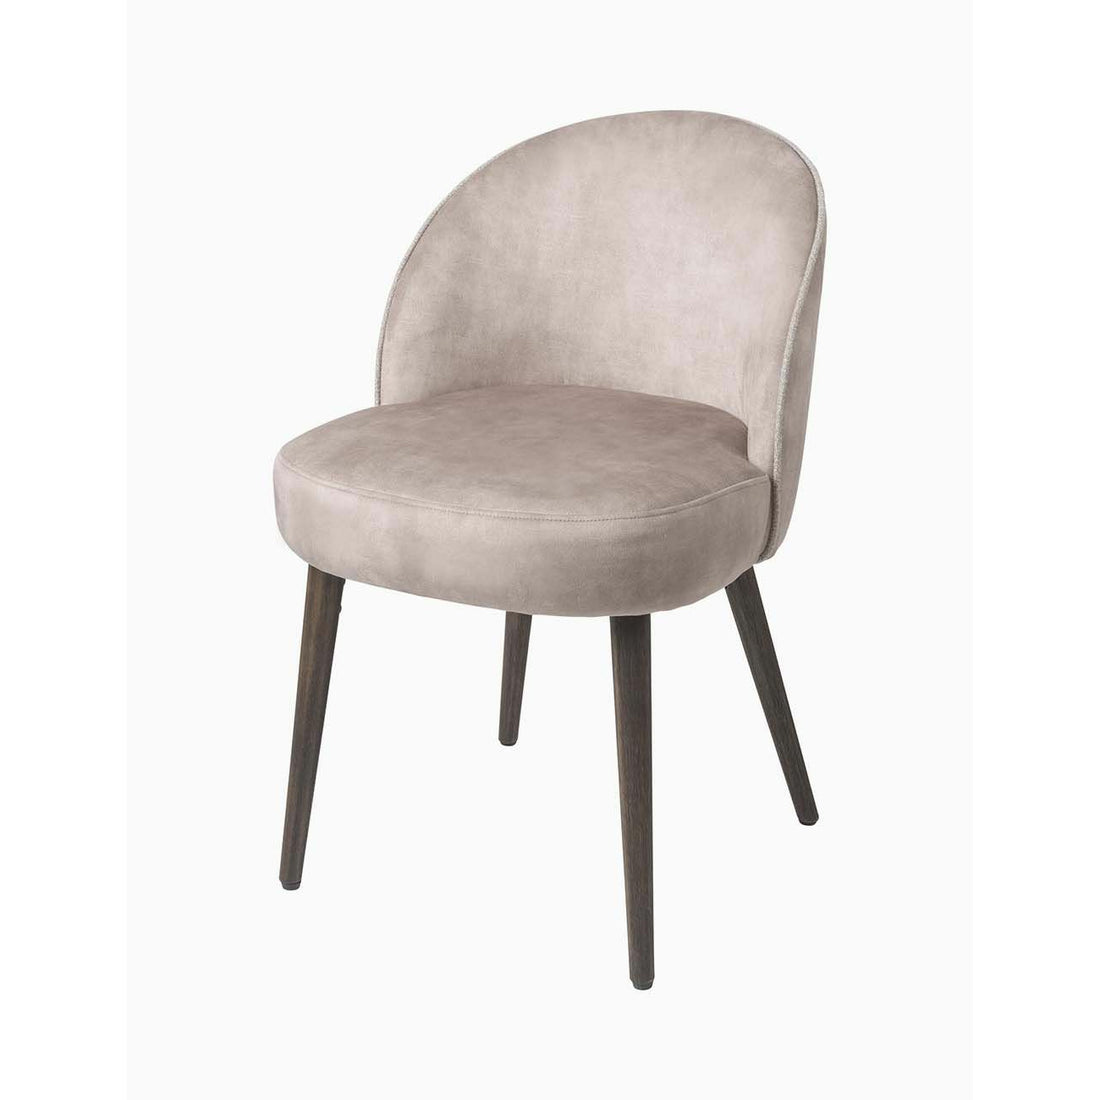 Cosy Living the Kyla Dining Chair - Cashmere*